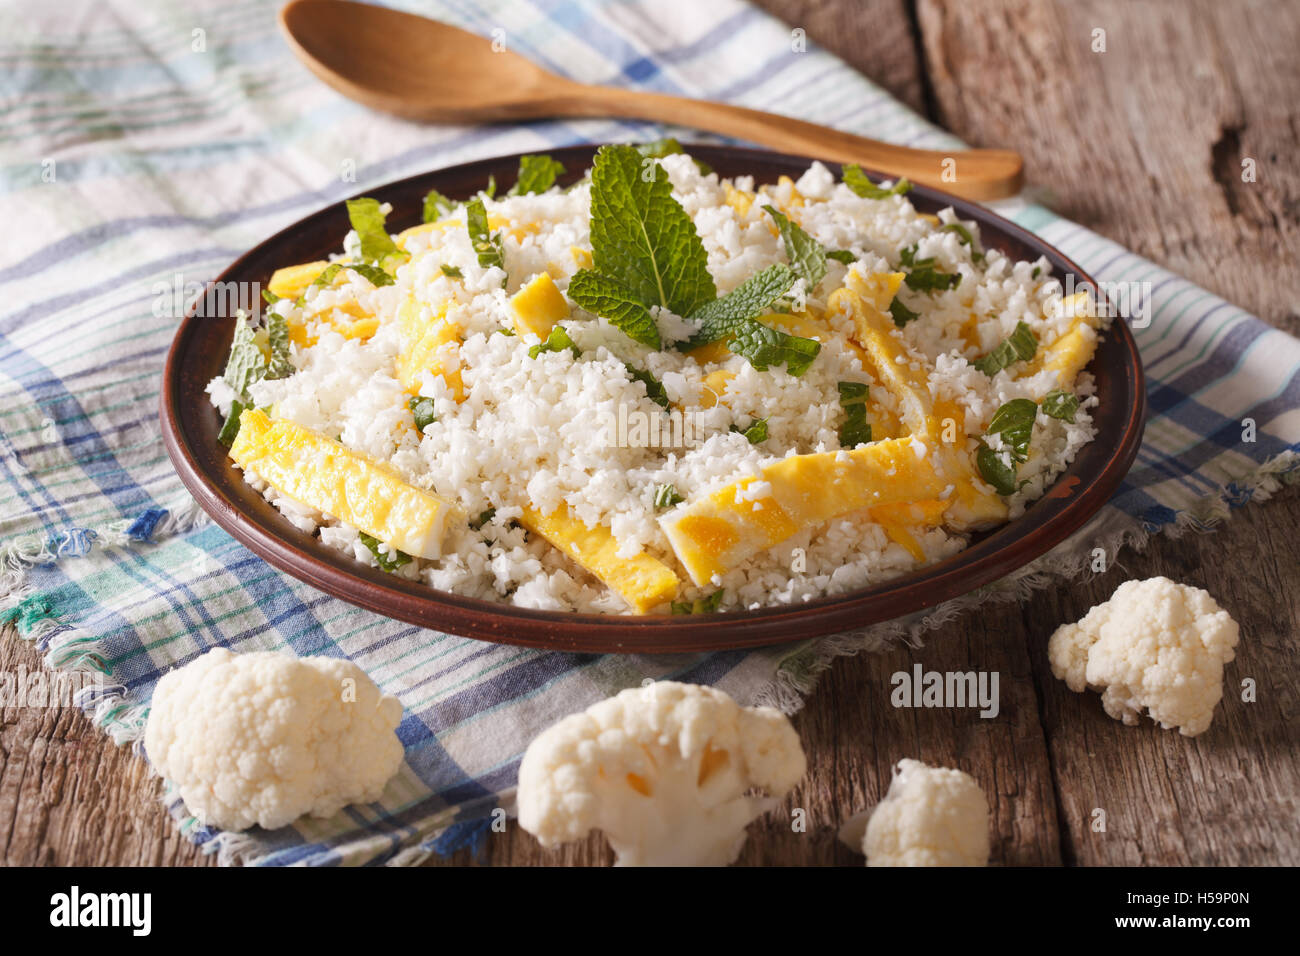 Dietary food: cauliflower rice with scrambled eggs and herbs closeup on a plate. horizontal Stock Photo